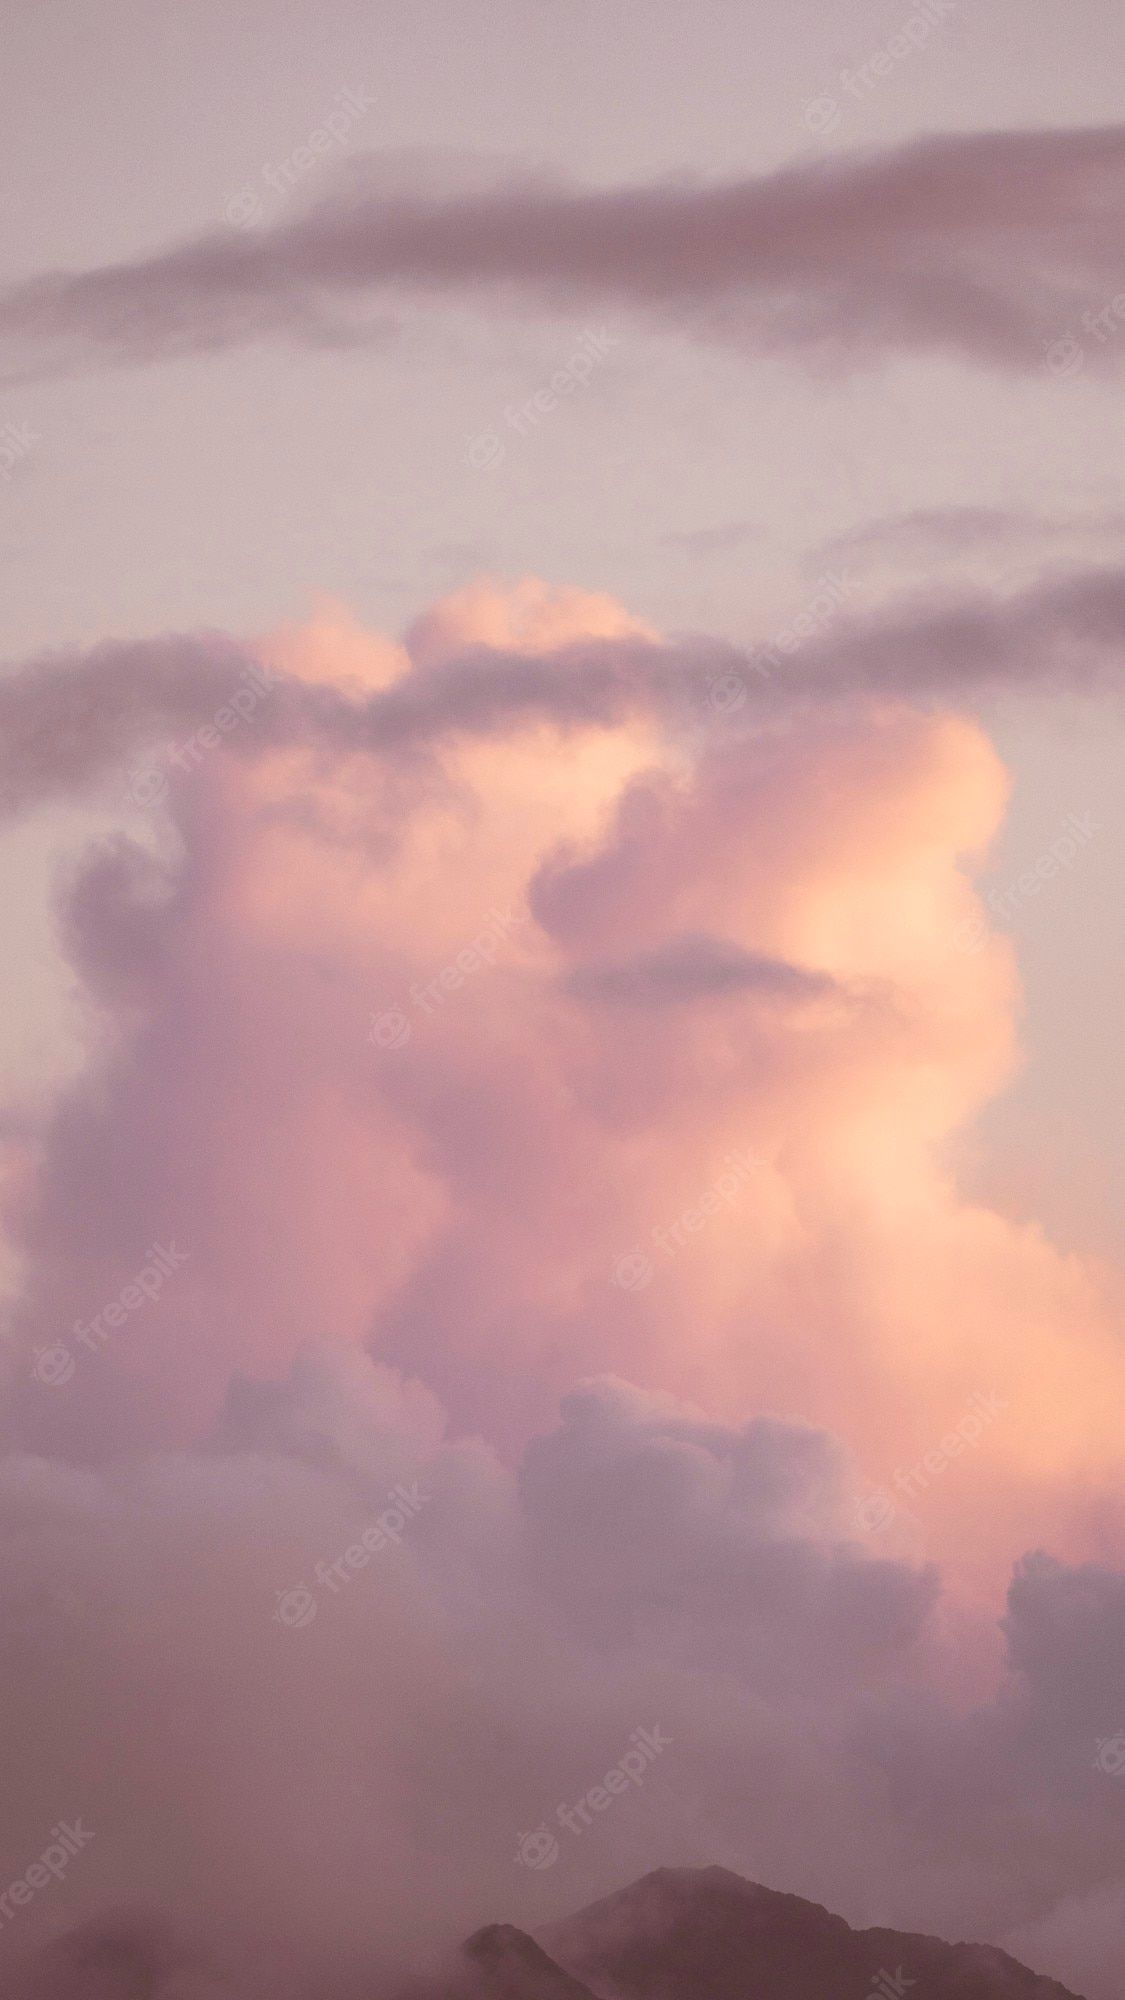 A pink and purple sky with clouds - Cloud, sky, vintage clouds